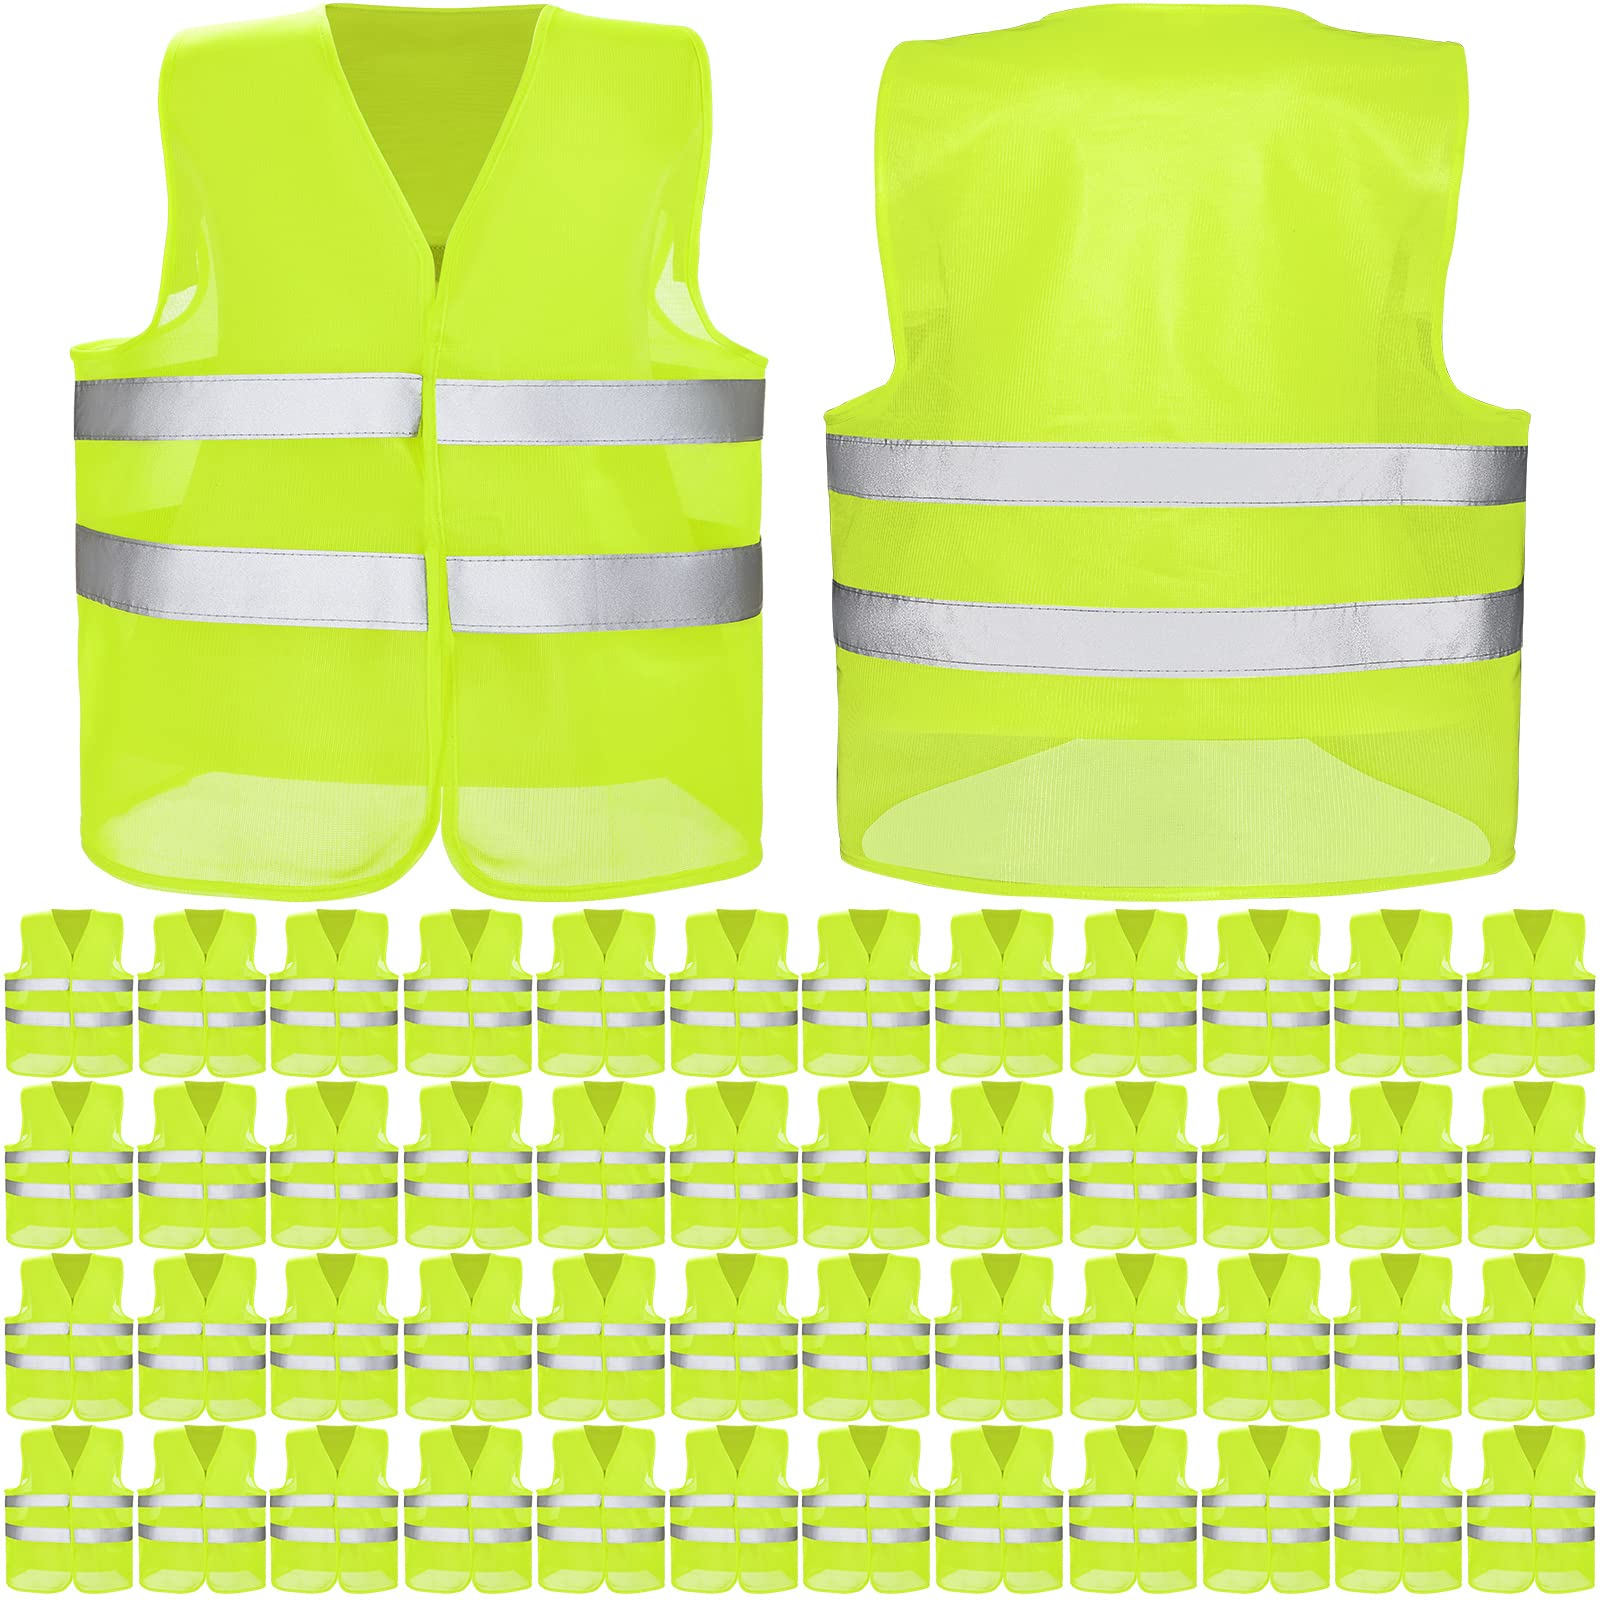 50 Pack Reflective Safety Vest in Bulk, High Visibility Mesh Vest with Reflective Strips Breathable Construction Vest for Men Women Cycling Runner Volunteer